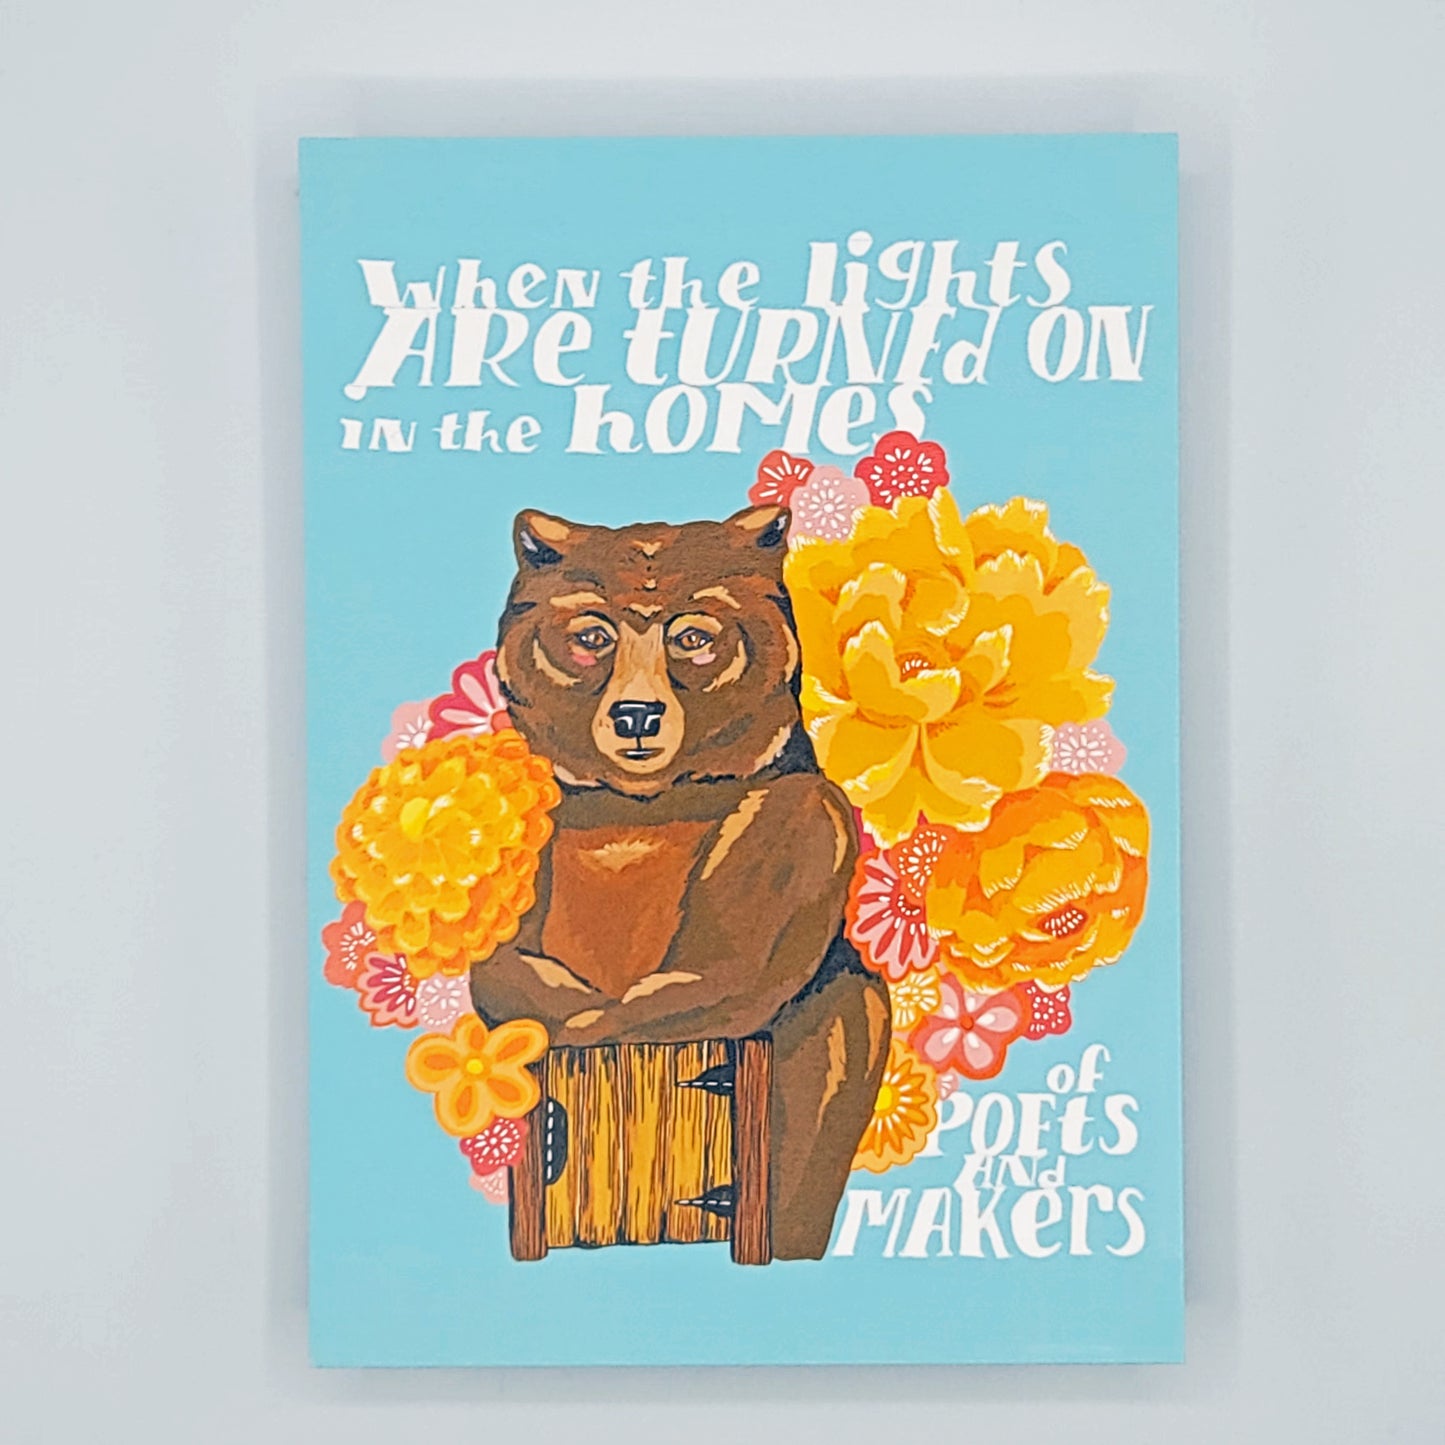 Poets and Makers Print